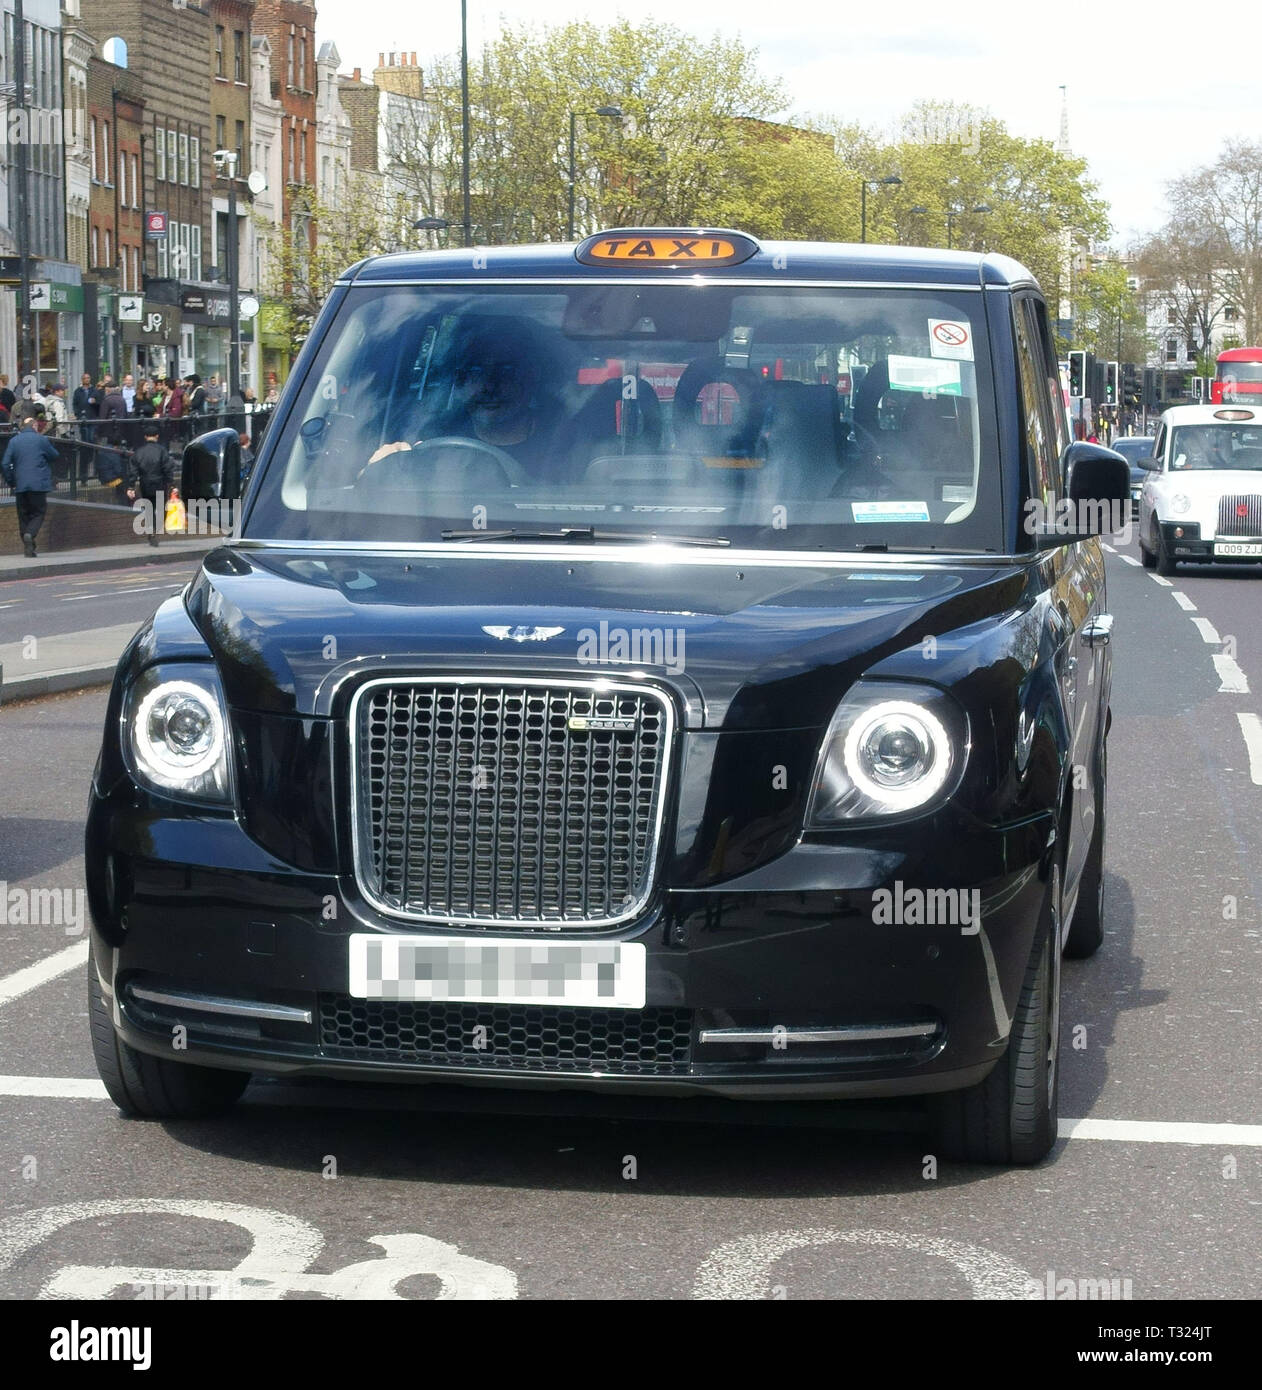 TX electric London taxi by London Electric Vehicle Company (LEVC) Stock Photo